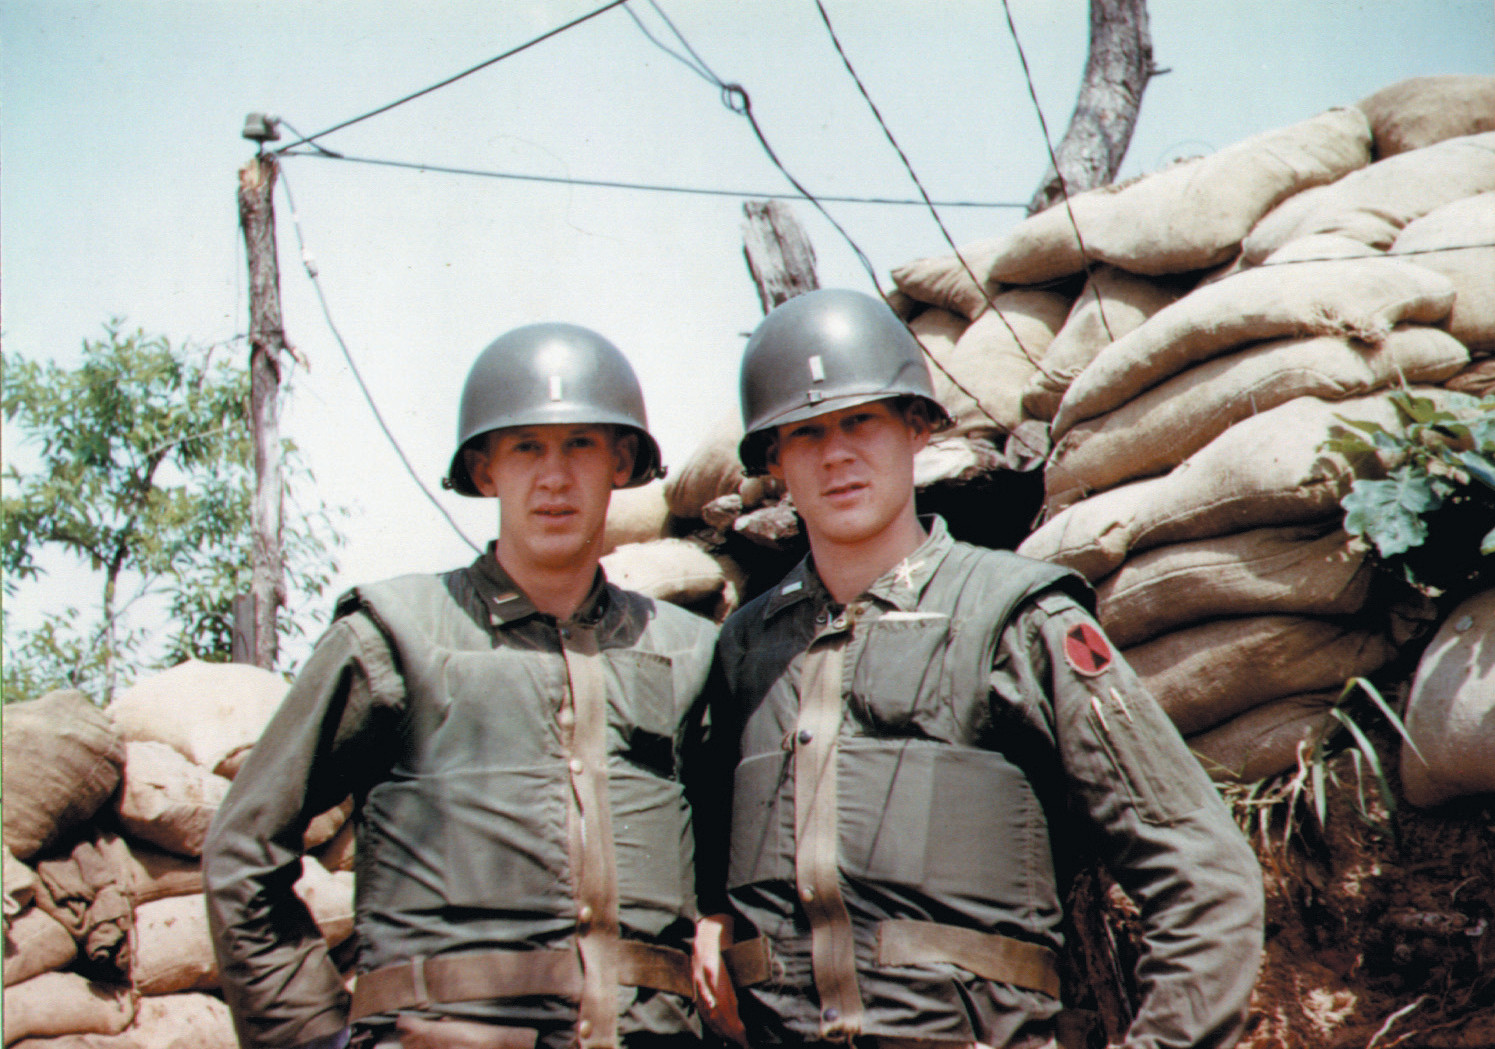 Counterfire officer Richard Ecker (left) poses with his replacement Lieutenant John Nisbet.